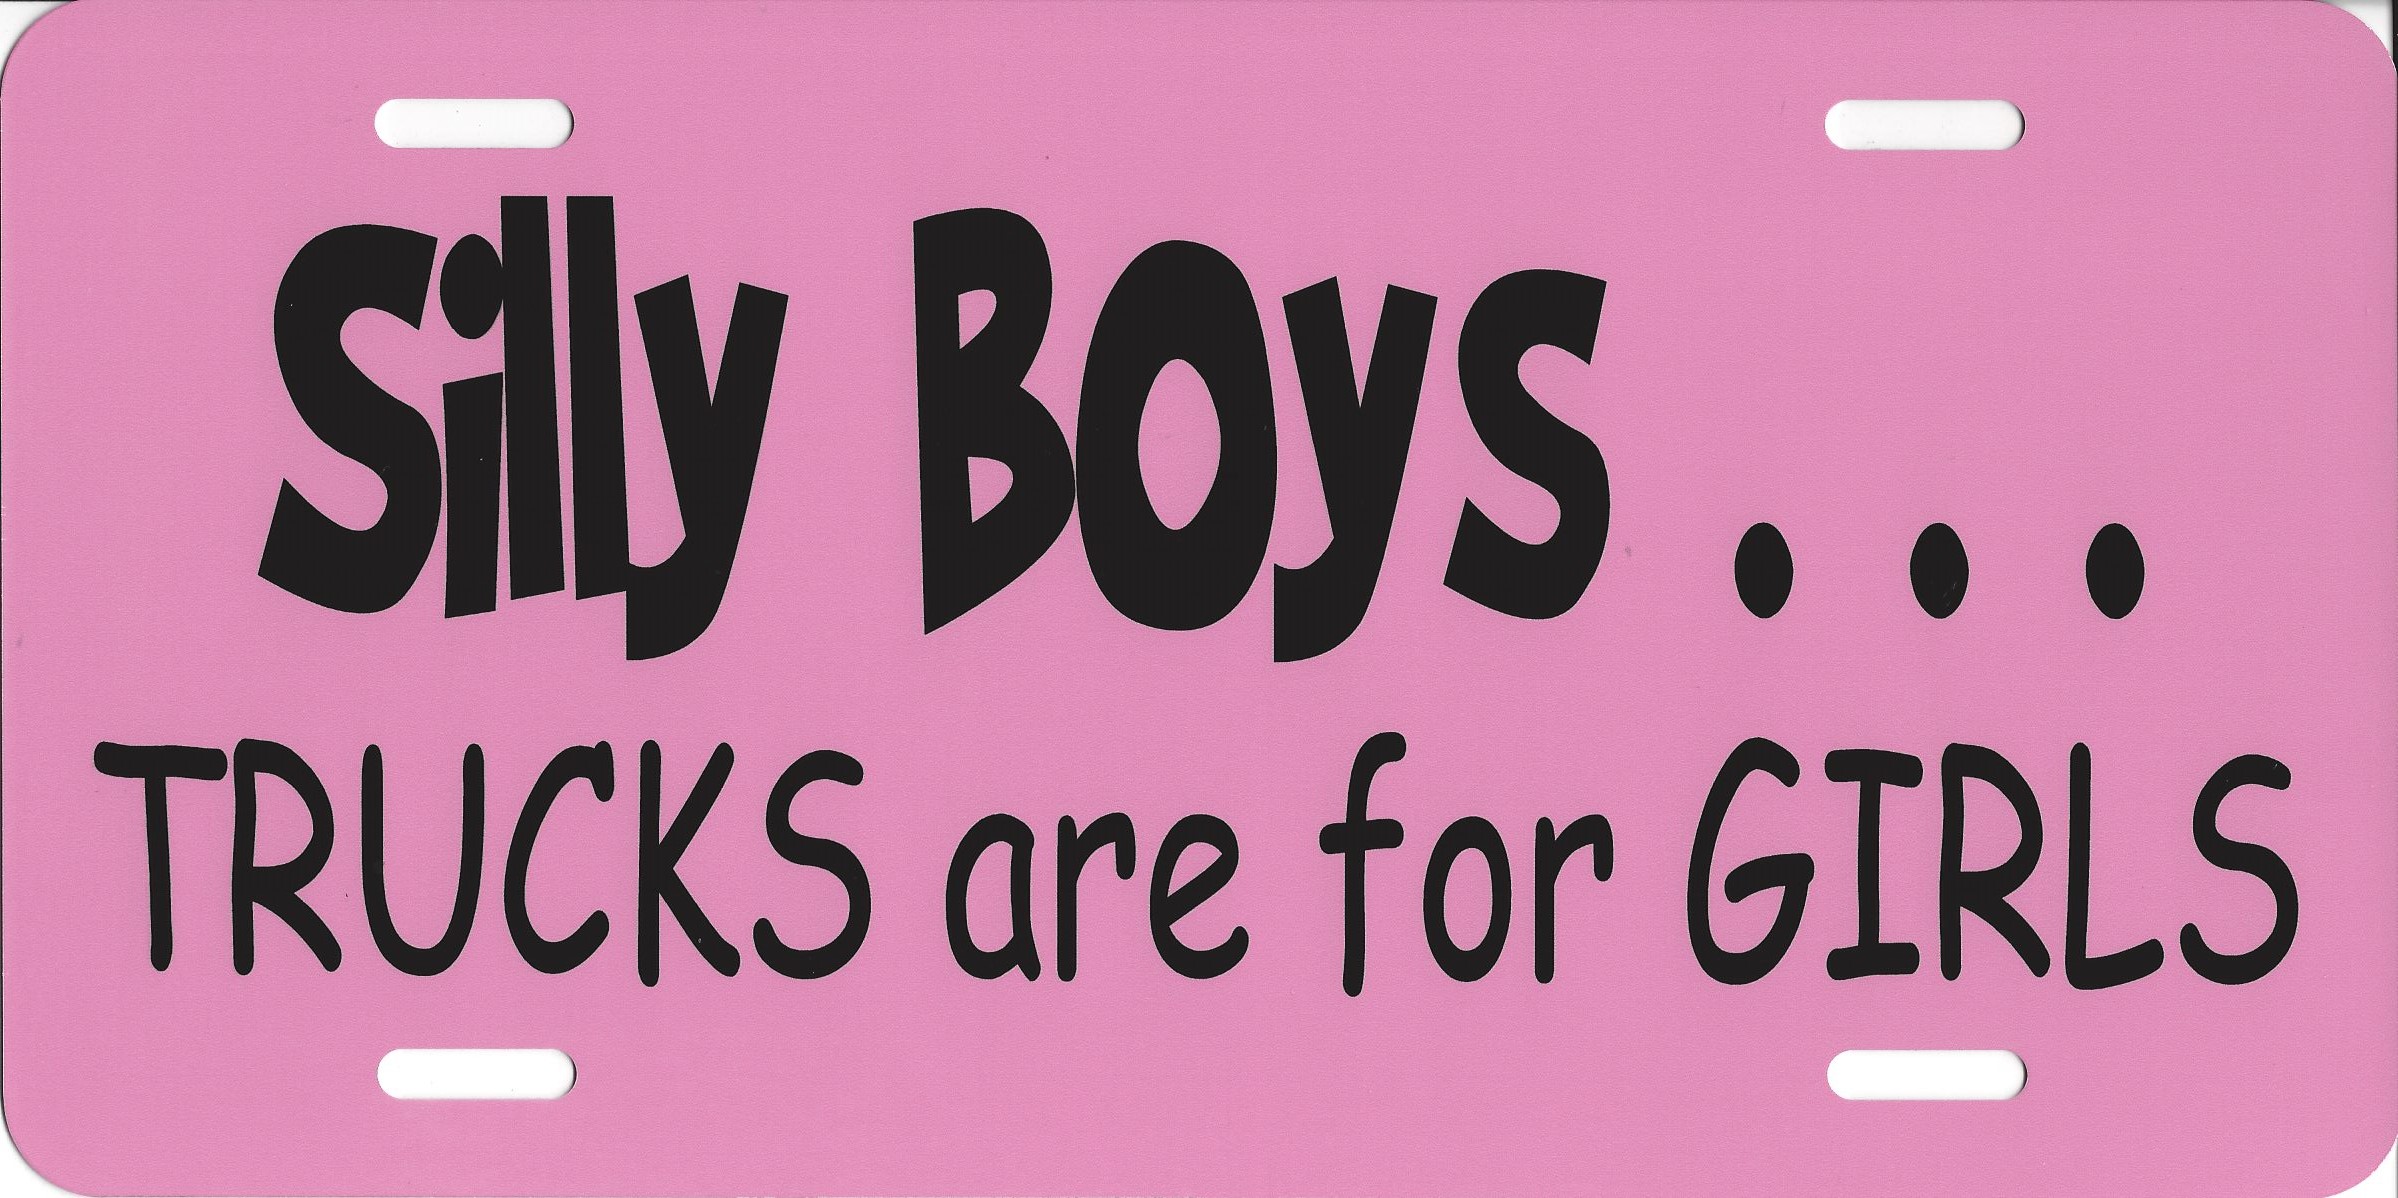 Silly Boys Trucks Are For Girls Pink Plate